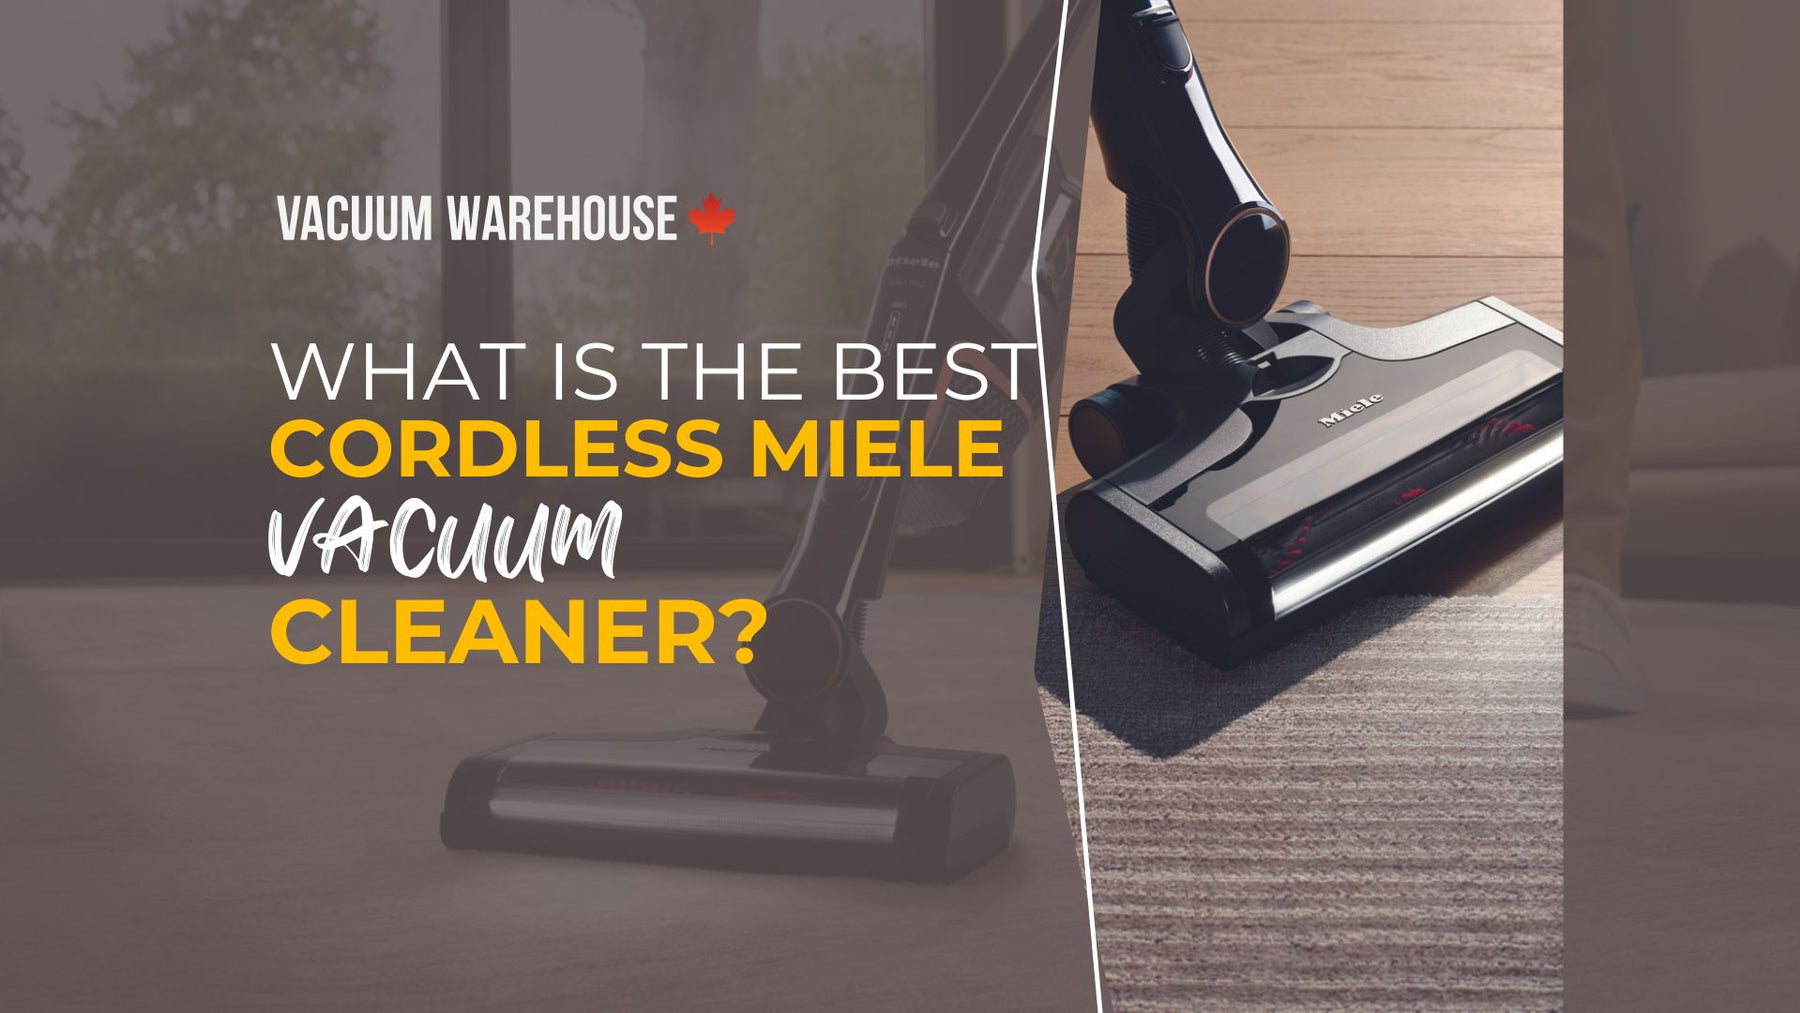 What is the best cordless Miele vacuum cleaner?